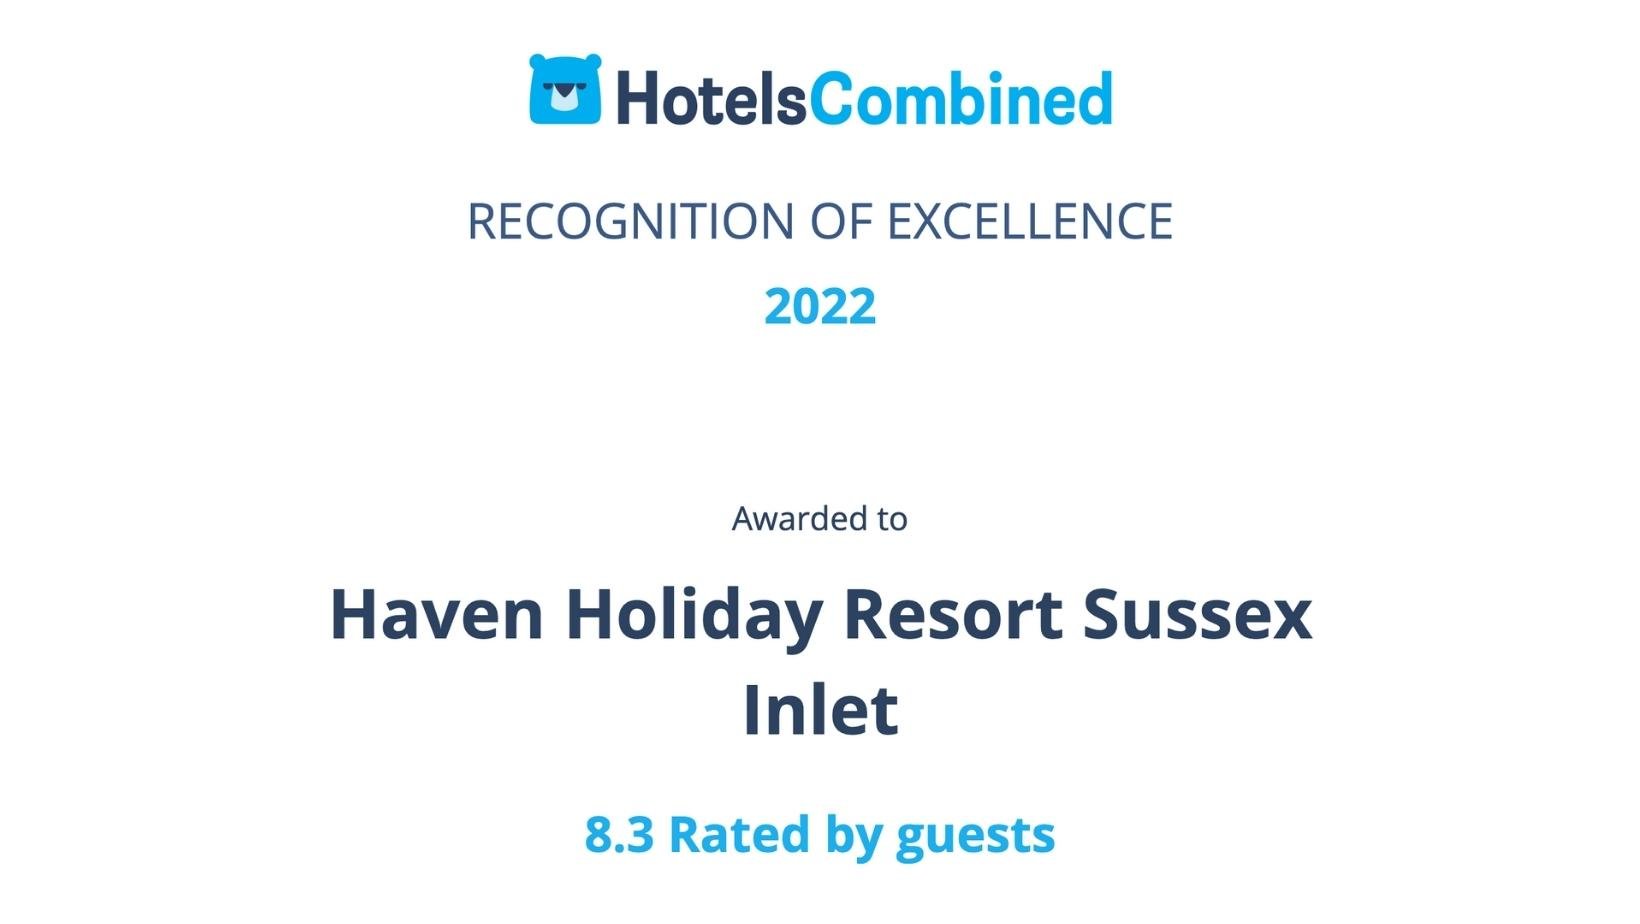 Haven Holiday Resort in Sussex Inlet on the NSW South Coast earns a Recognition of Excellence Award 2022 from HotelsCombined for their high review ratings.